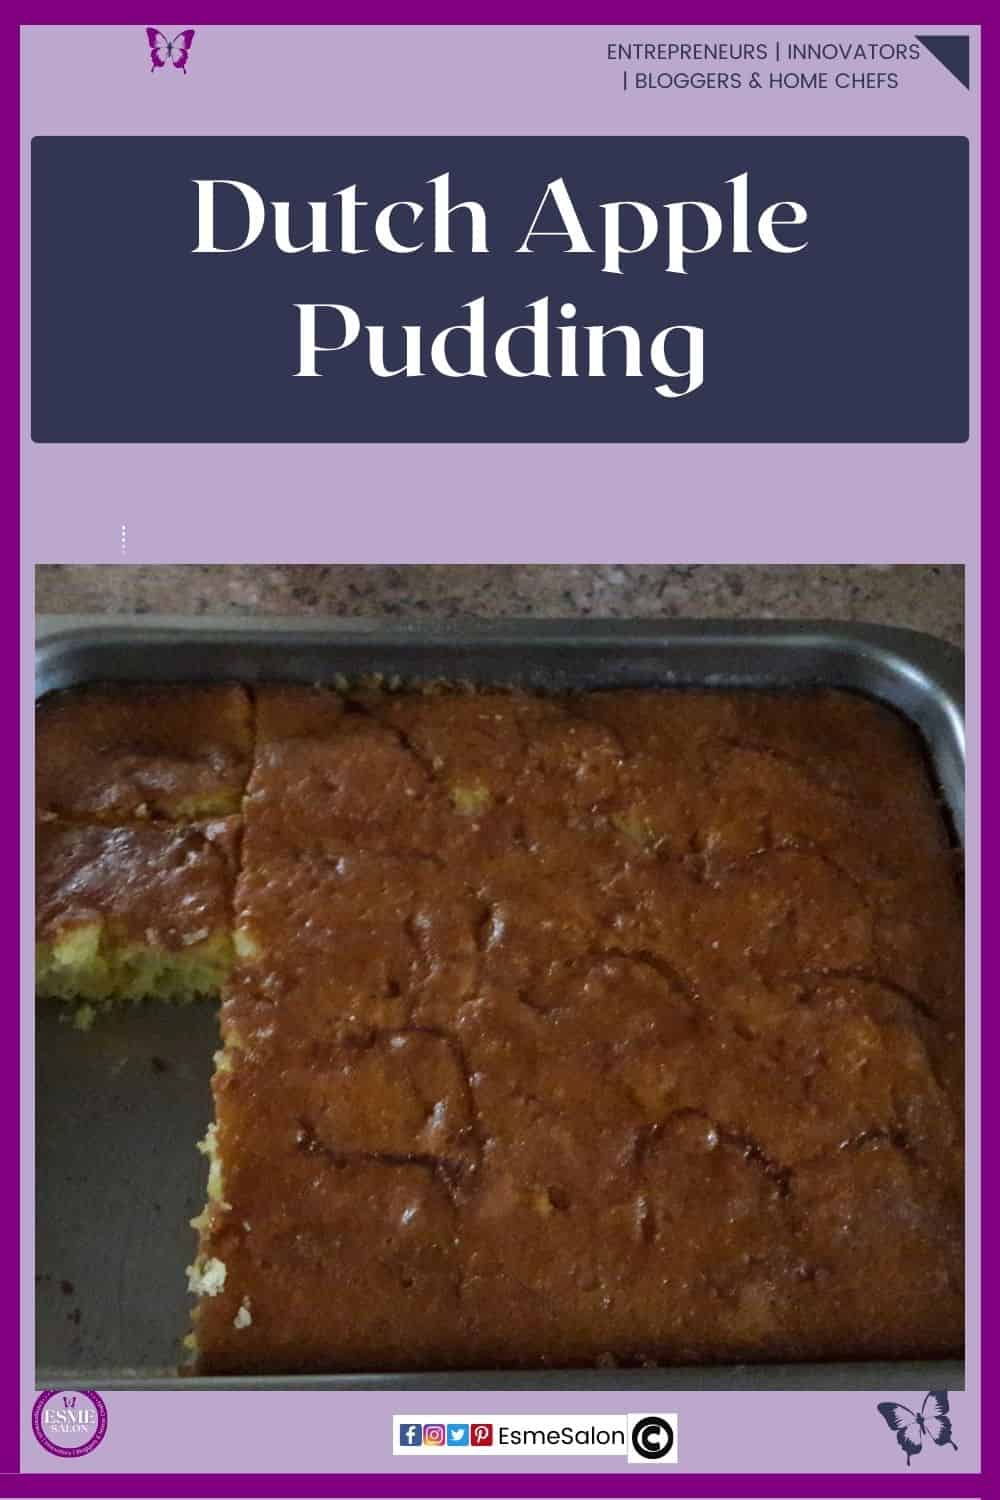 an image of a brown pudding, Dutch Apple Pudding in a stainless dish